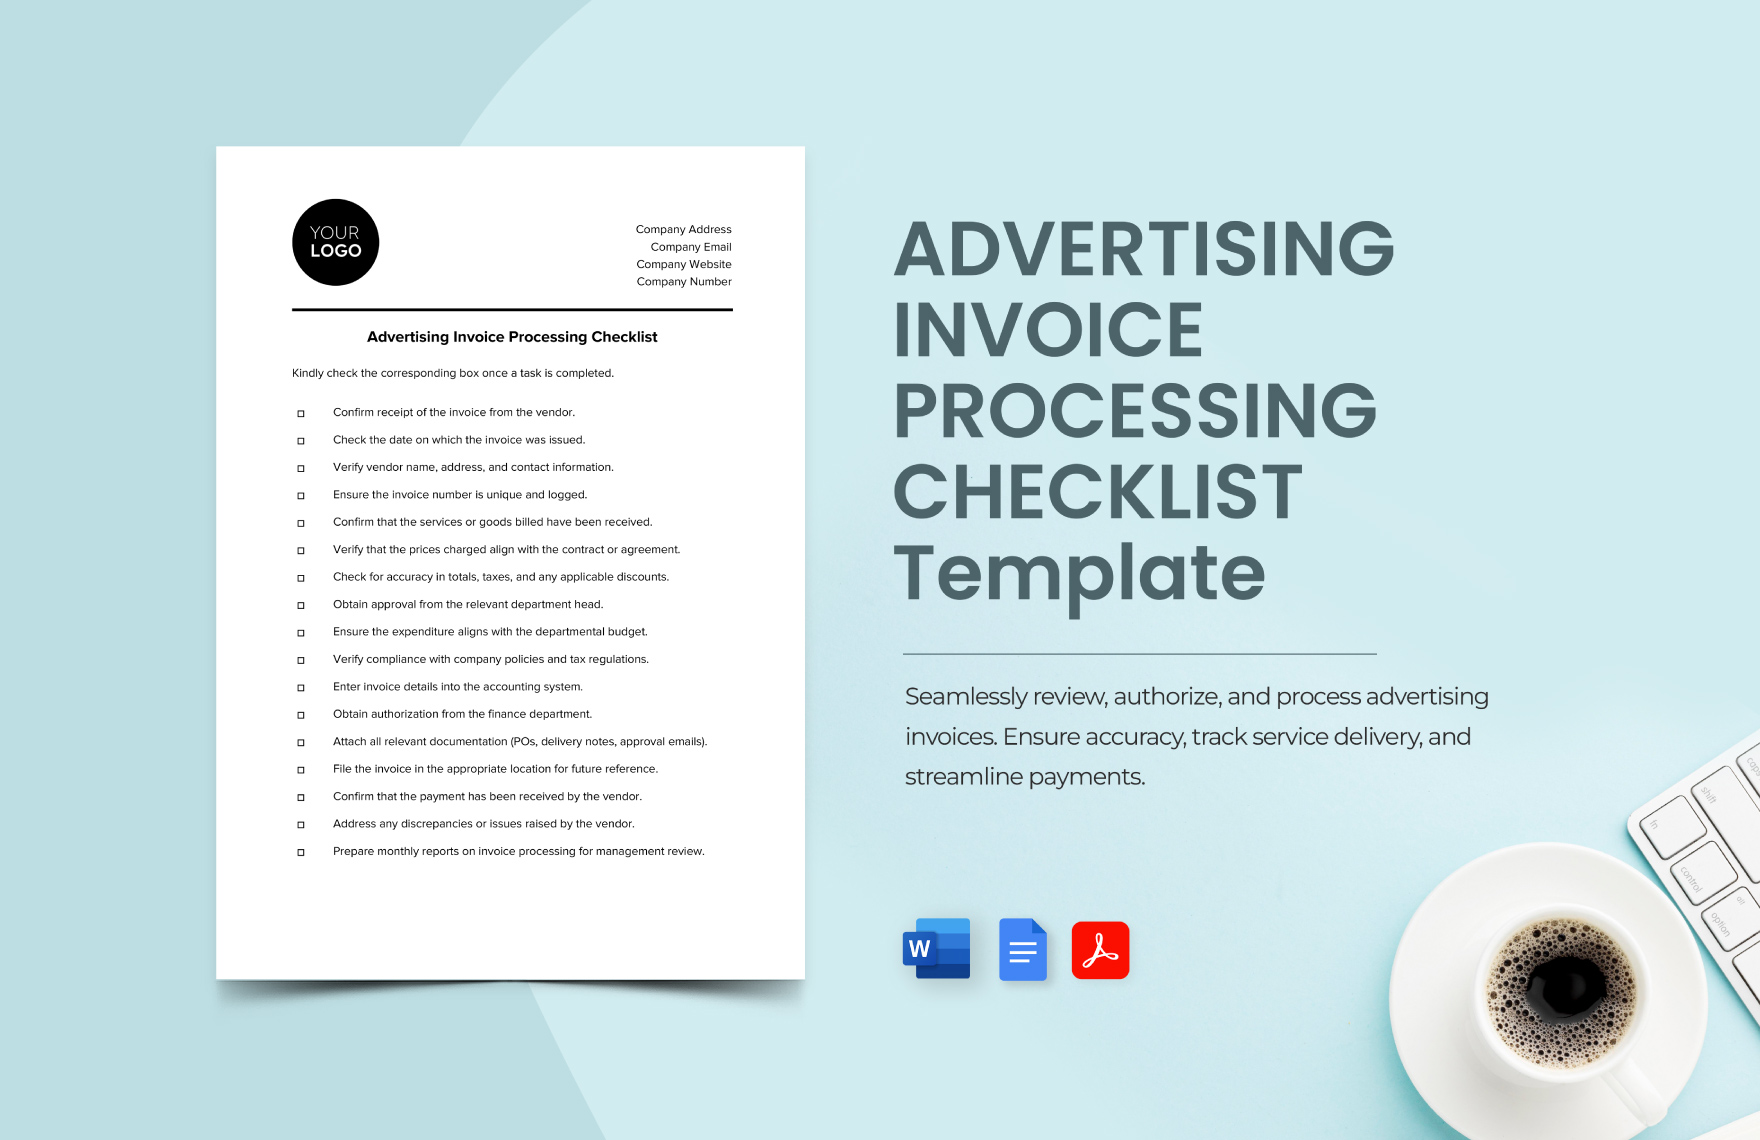 Advertising Invoice Processing Checklist Template in Word, Google Docs, PDF